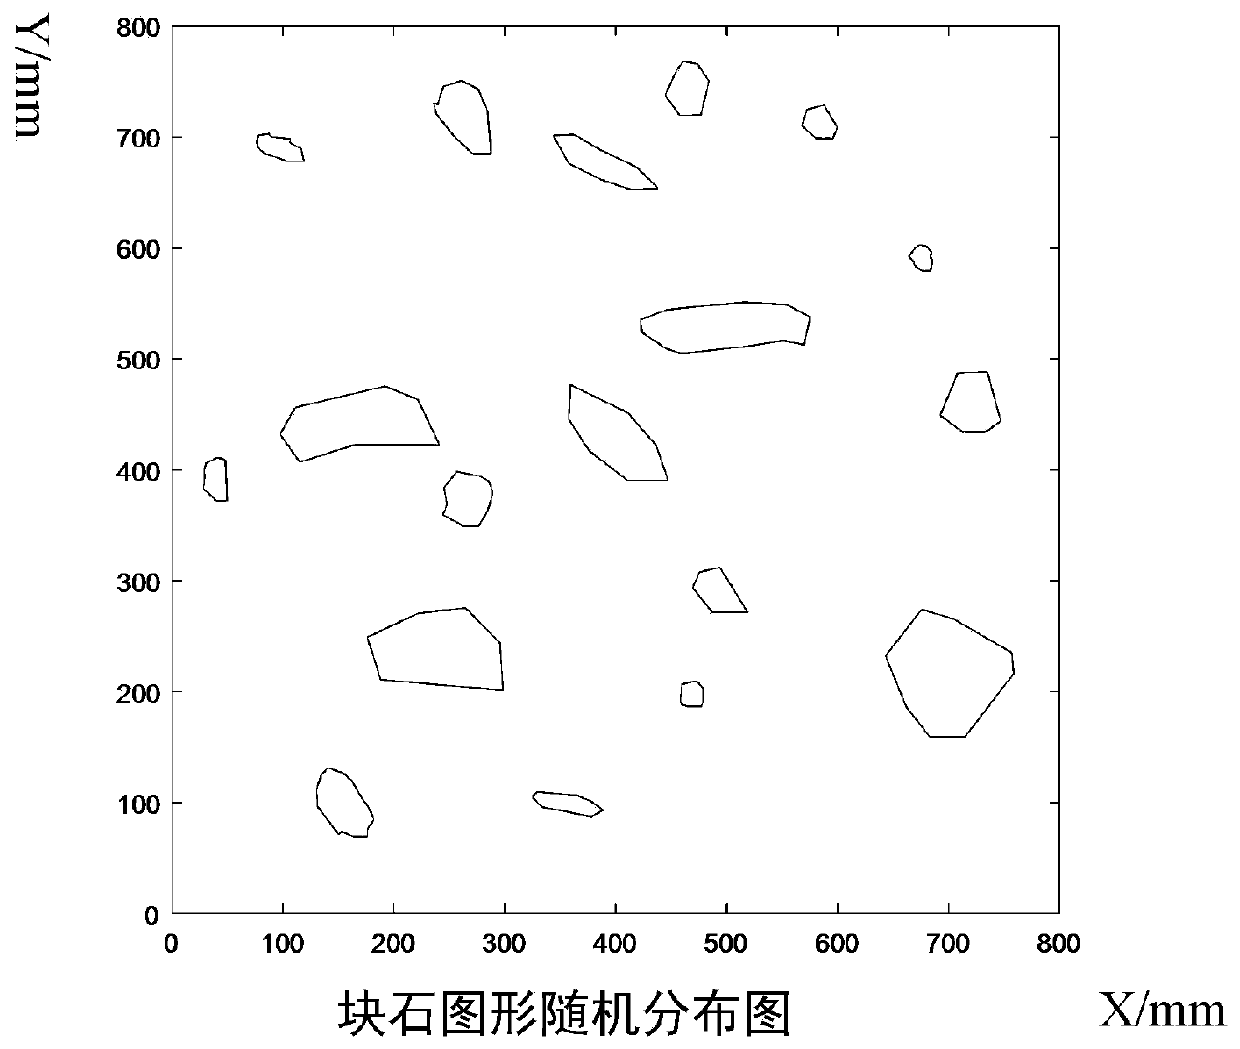 Dimension stone shape classification method based on rapid PCA algorithm and K-means clustering algorithm